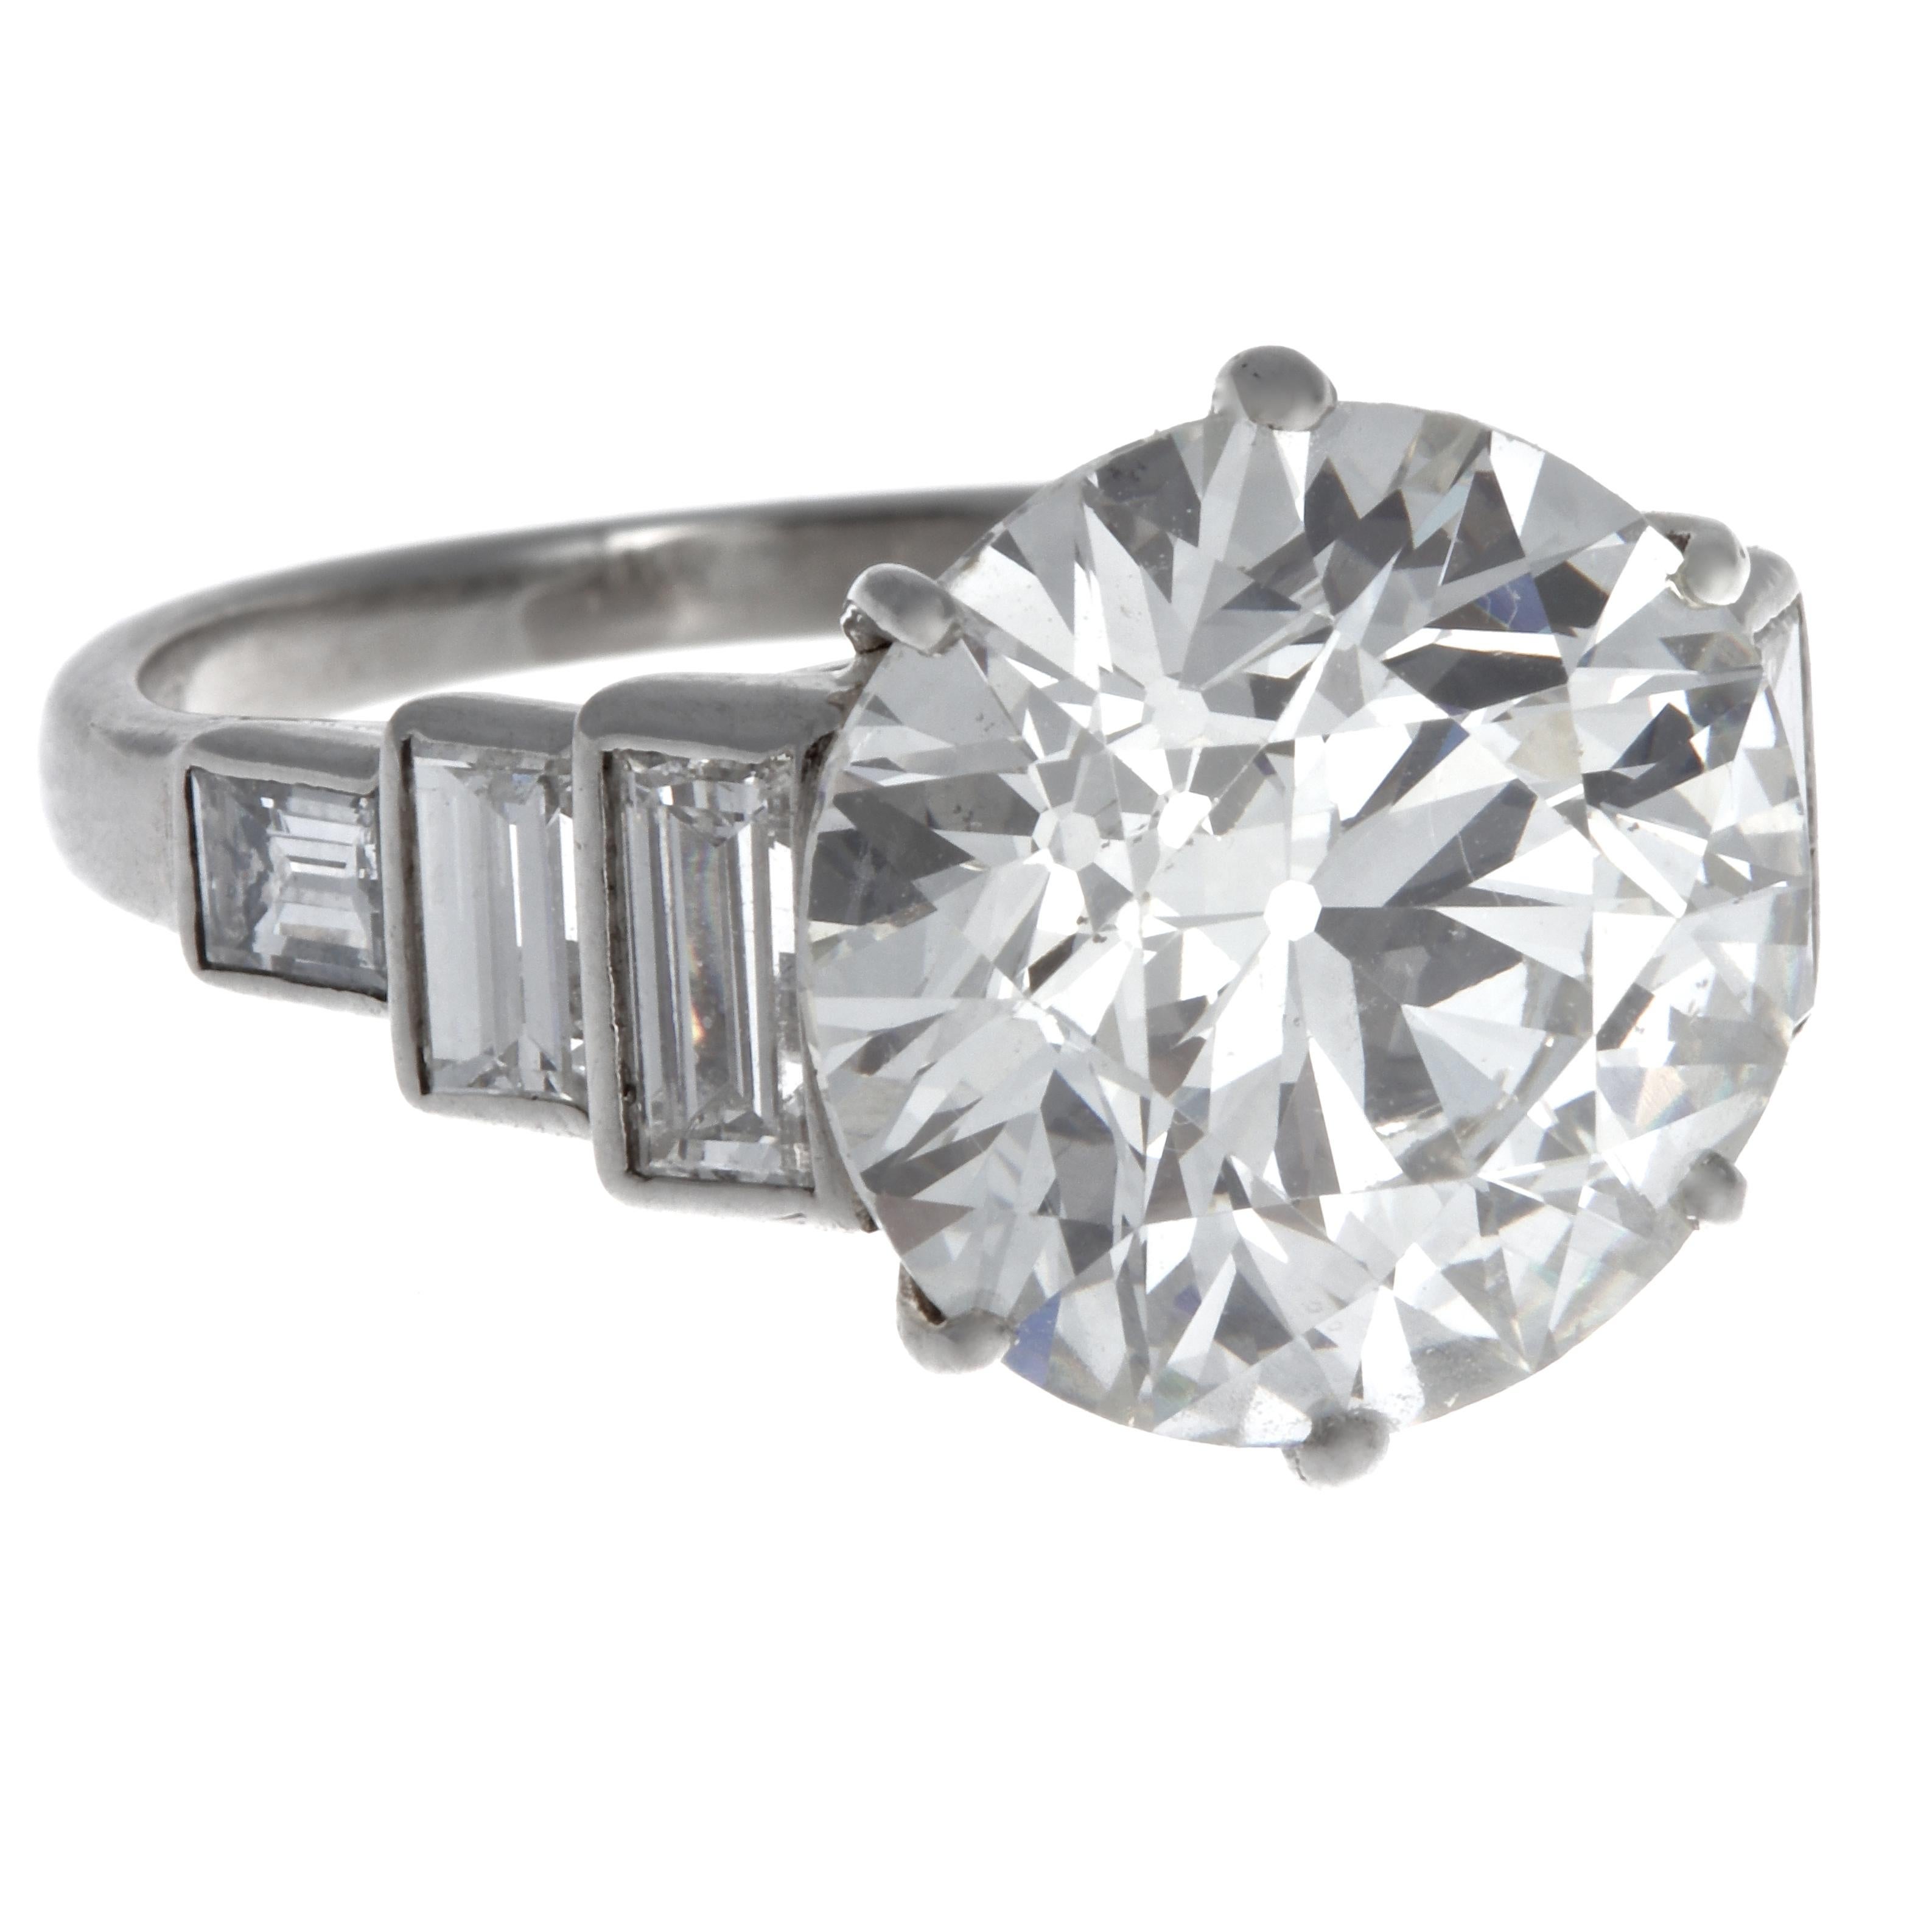 Looking for a statement engagement ring or a solid upgrade? This is the one. Art Deco diamond platinum ring. The center stone is GIA certified old European cut diamond, 5.50 carats, I color SI1 clarity (#6214079060).  Accented by six baguette